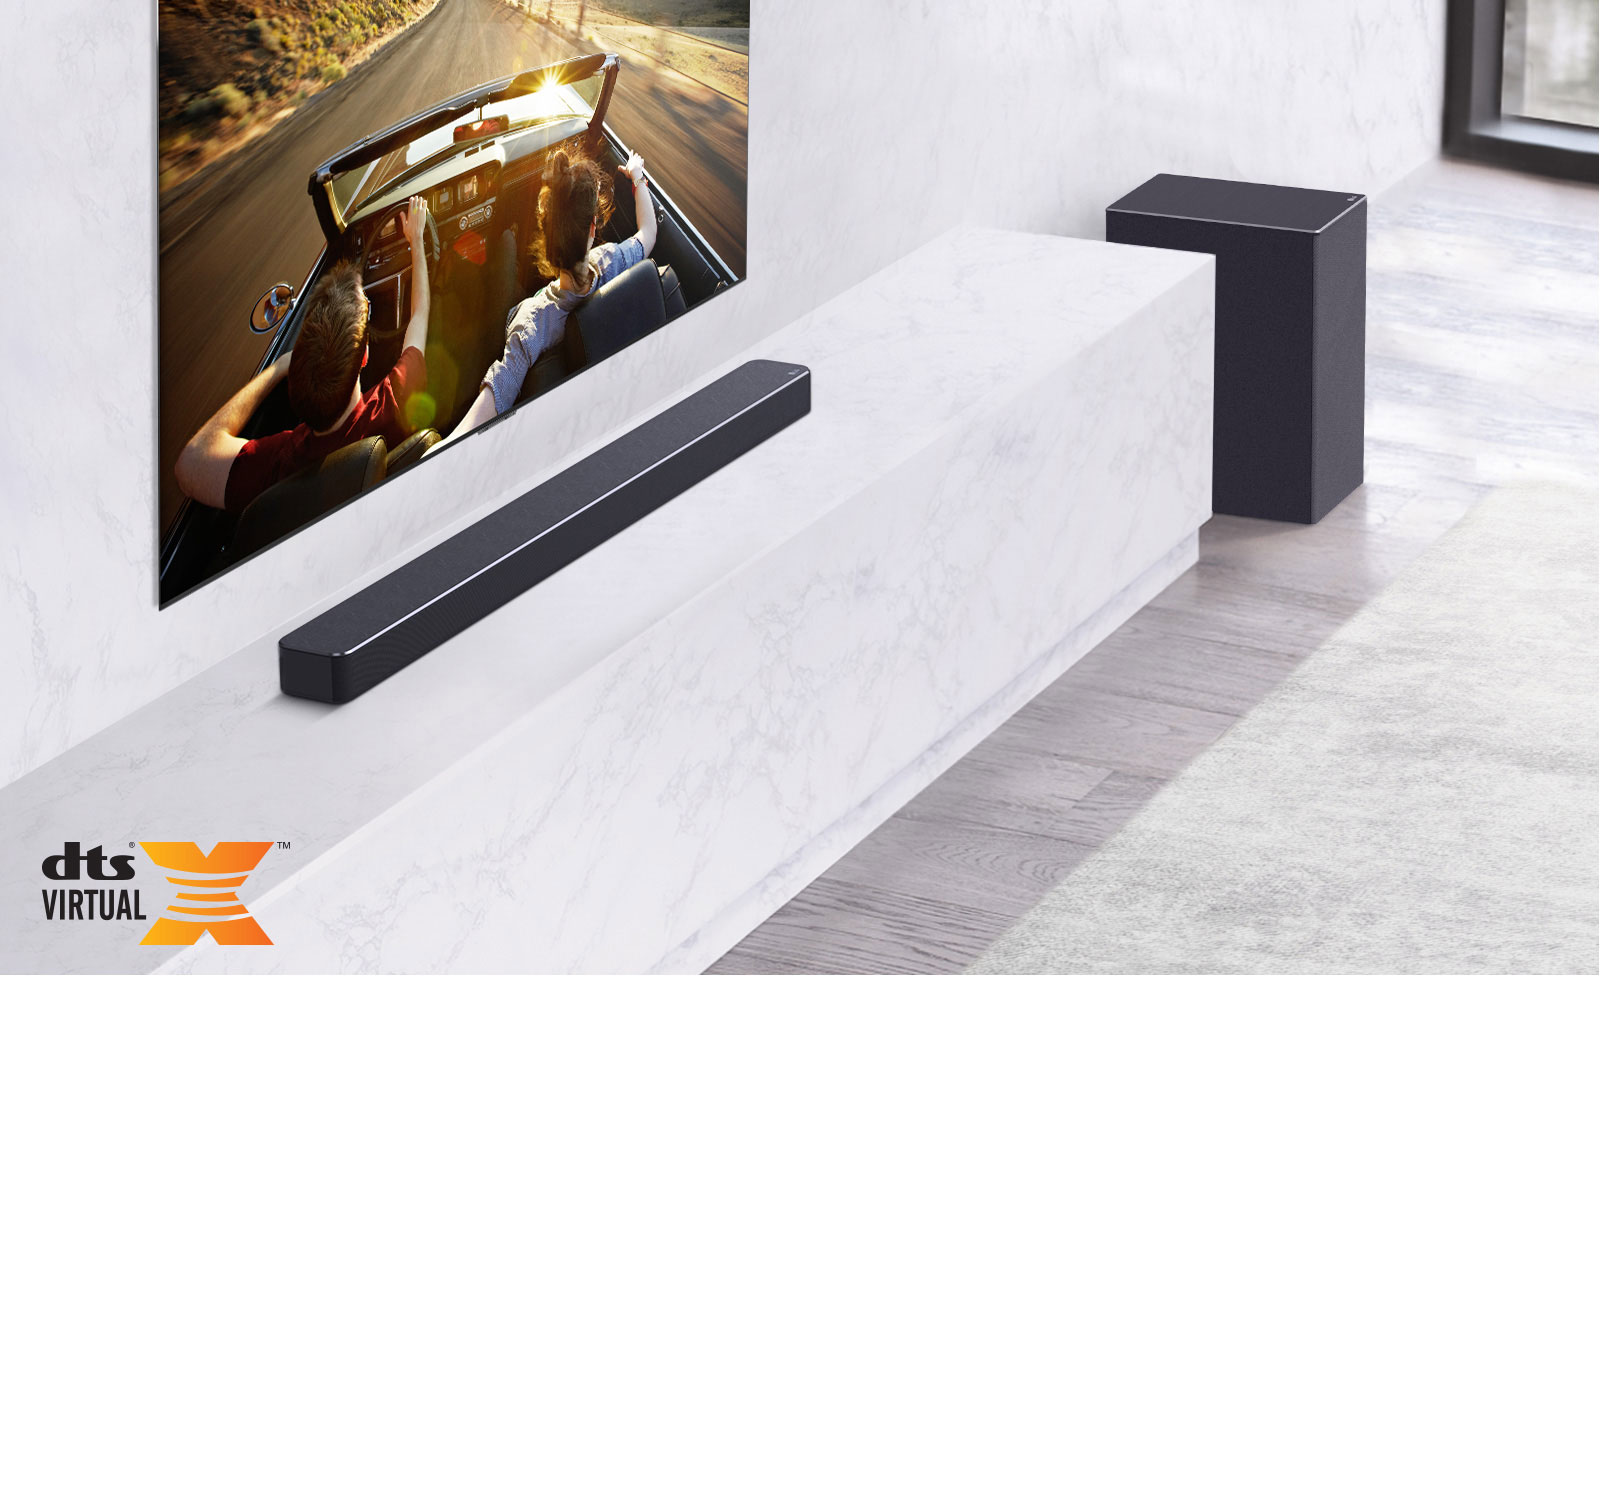 TV is on the wall, LG Soundbar is below on a white marble shelf with a sub-woofer to the right. TV shows a couple in a car